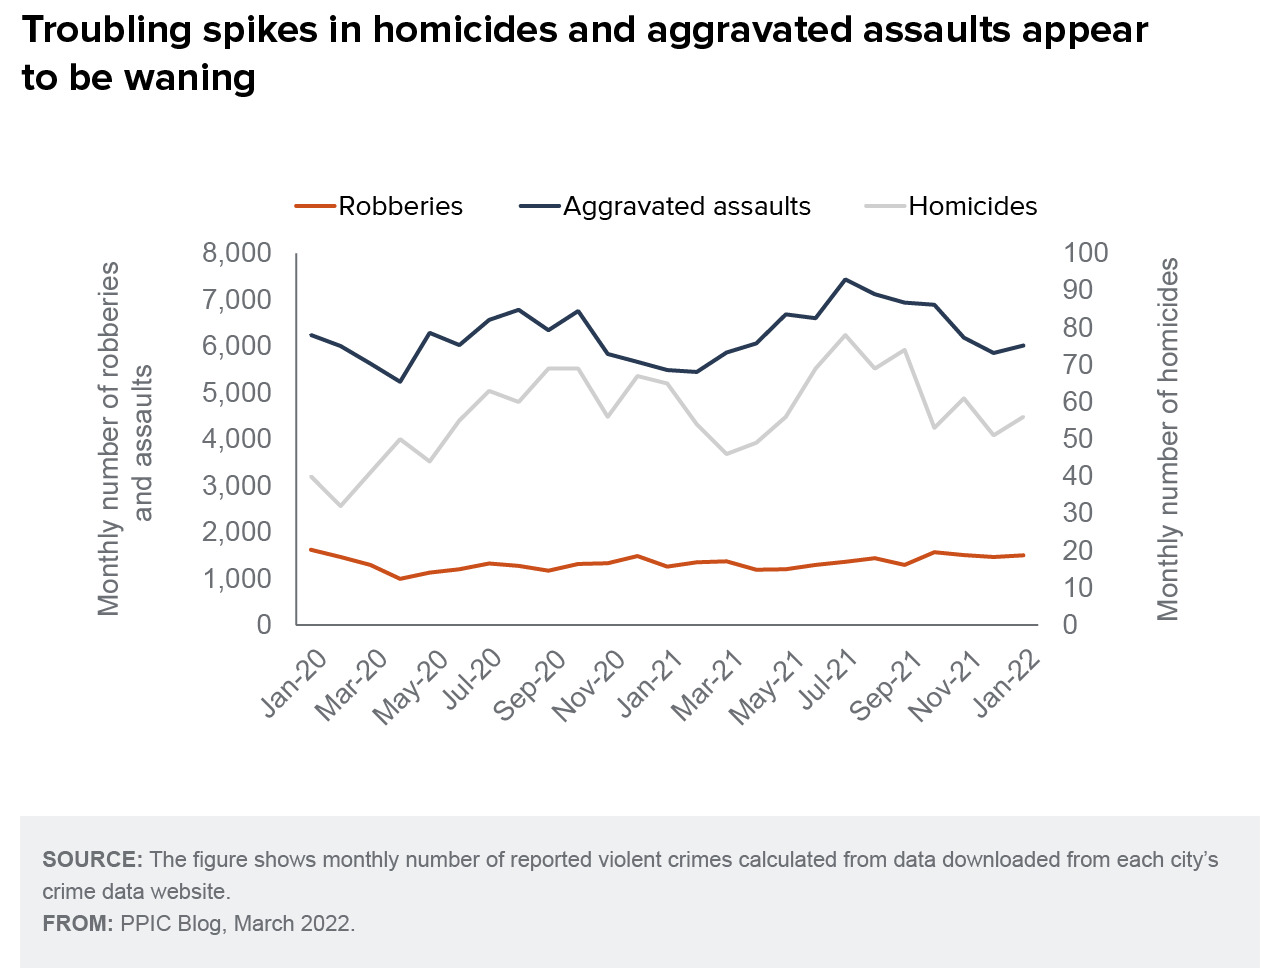 figure - Troubling spikes in homicides and aggravated assaults appear to be waning